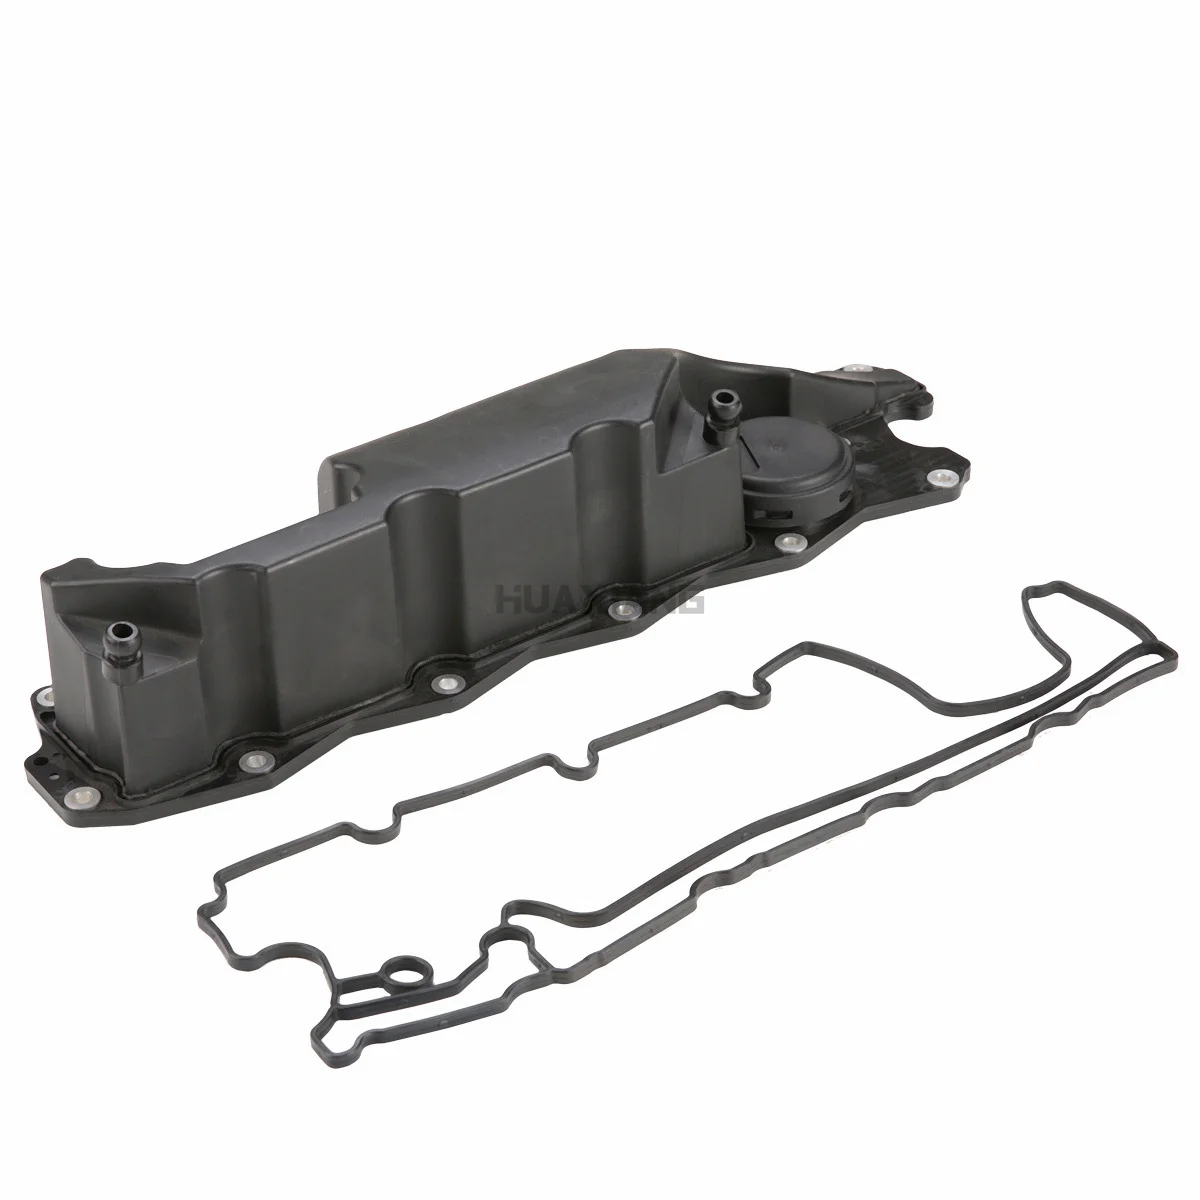 

In-stock CN US CA AU Engine Valve Cover with Gasket for Volvo S80 V70 XC60 XC70 XC90 L6 3.2L 30757664 30788442